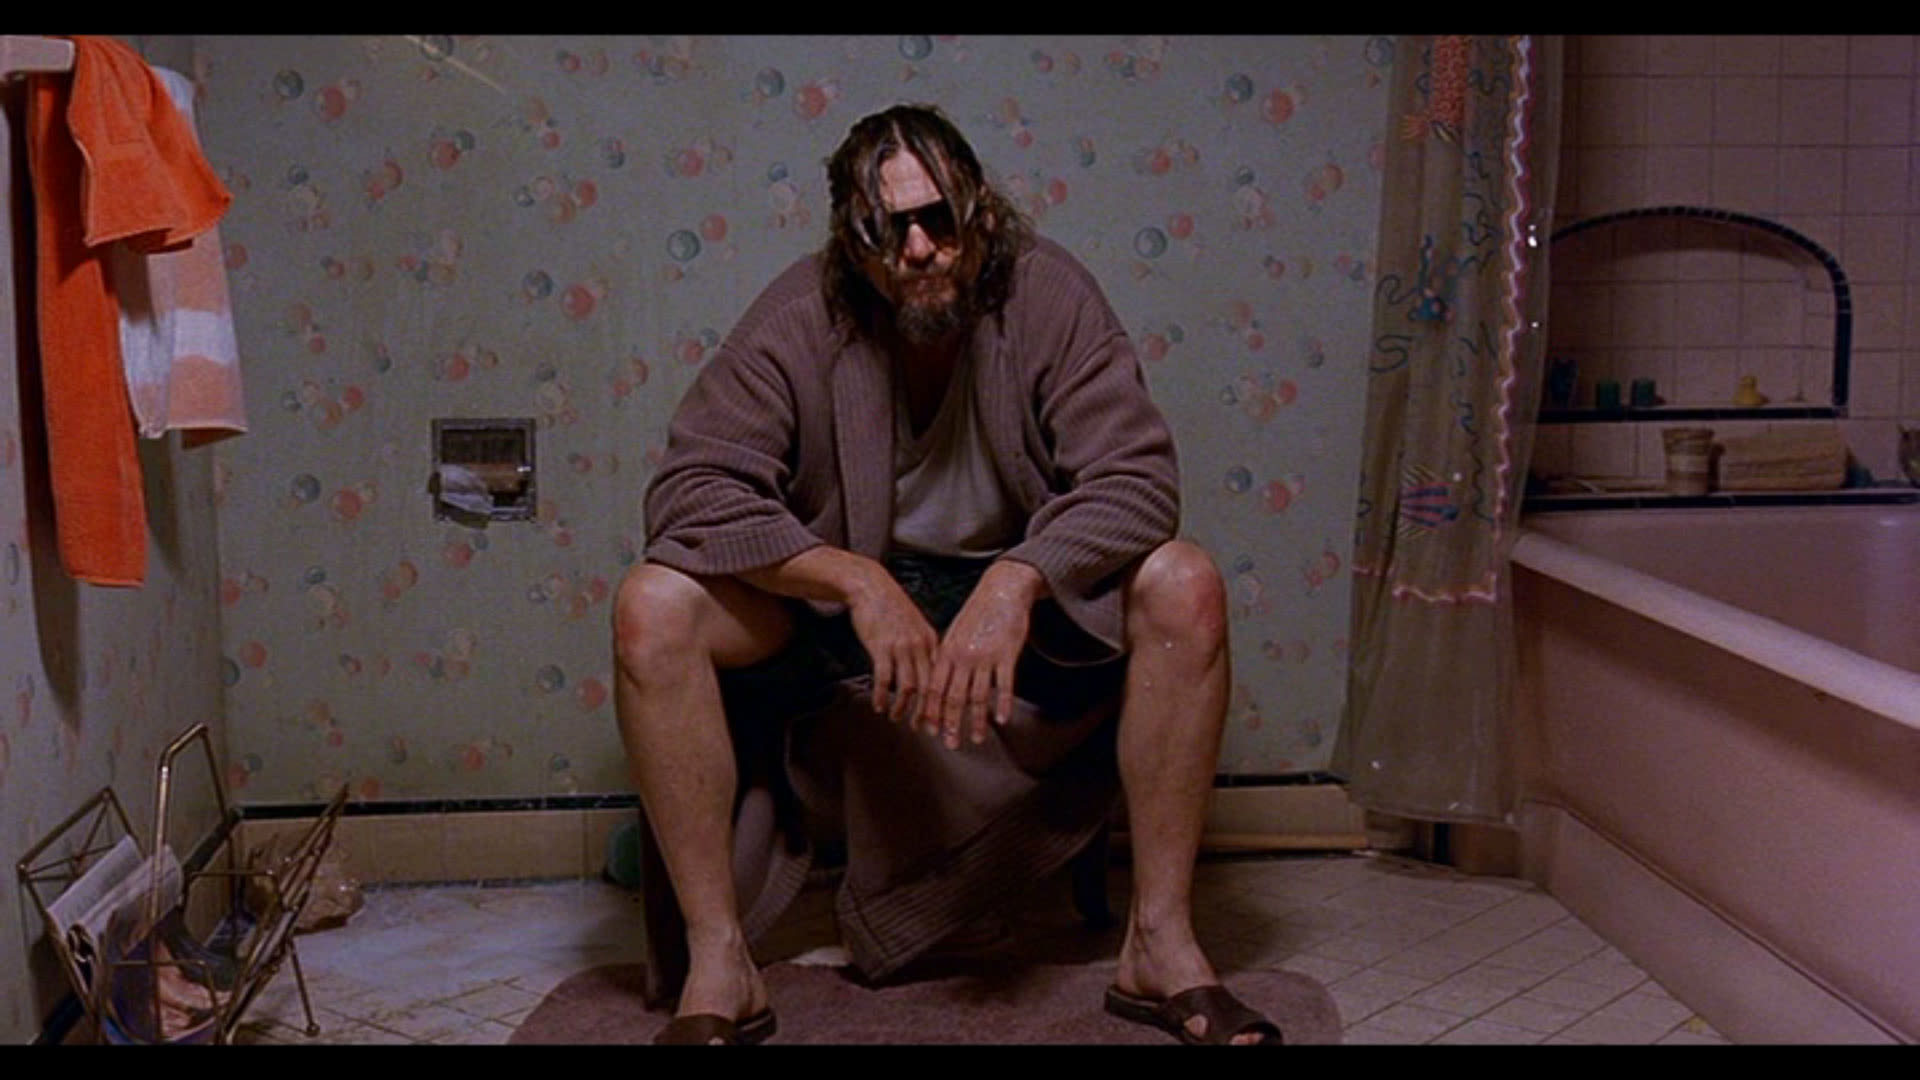 Watch "The Big Lebowski" The Front Row The New Yorker